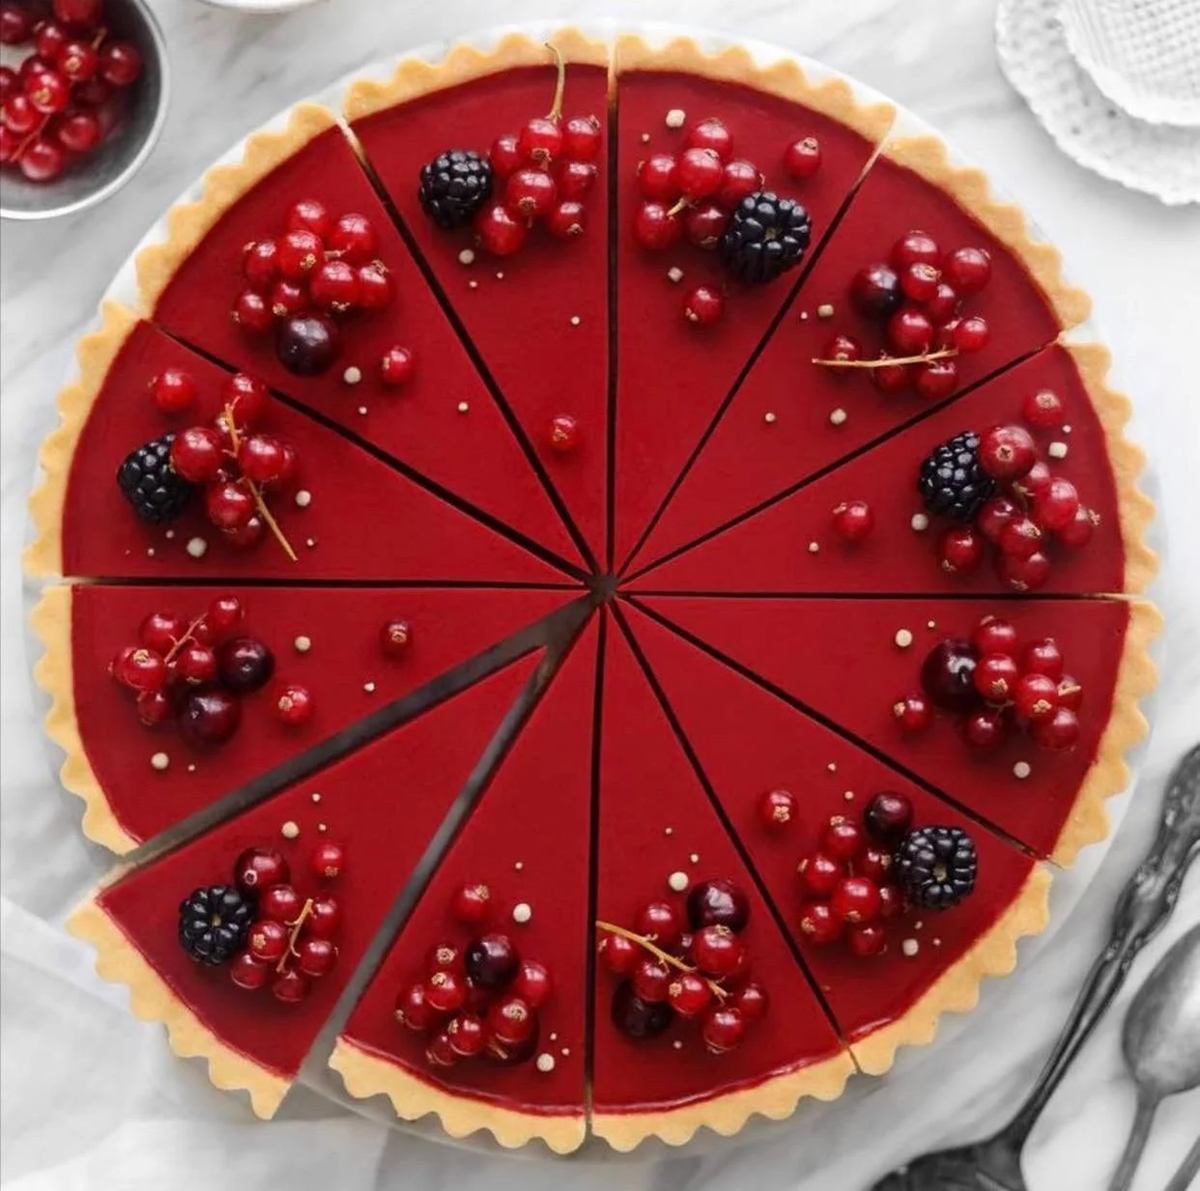 Perfectly Executed Cranberry Tart